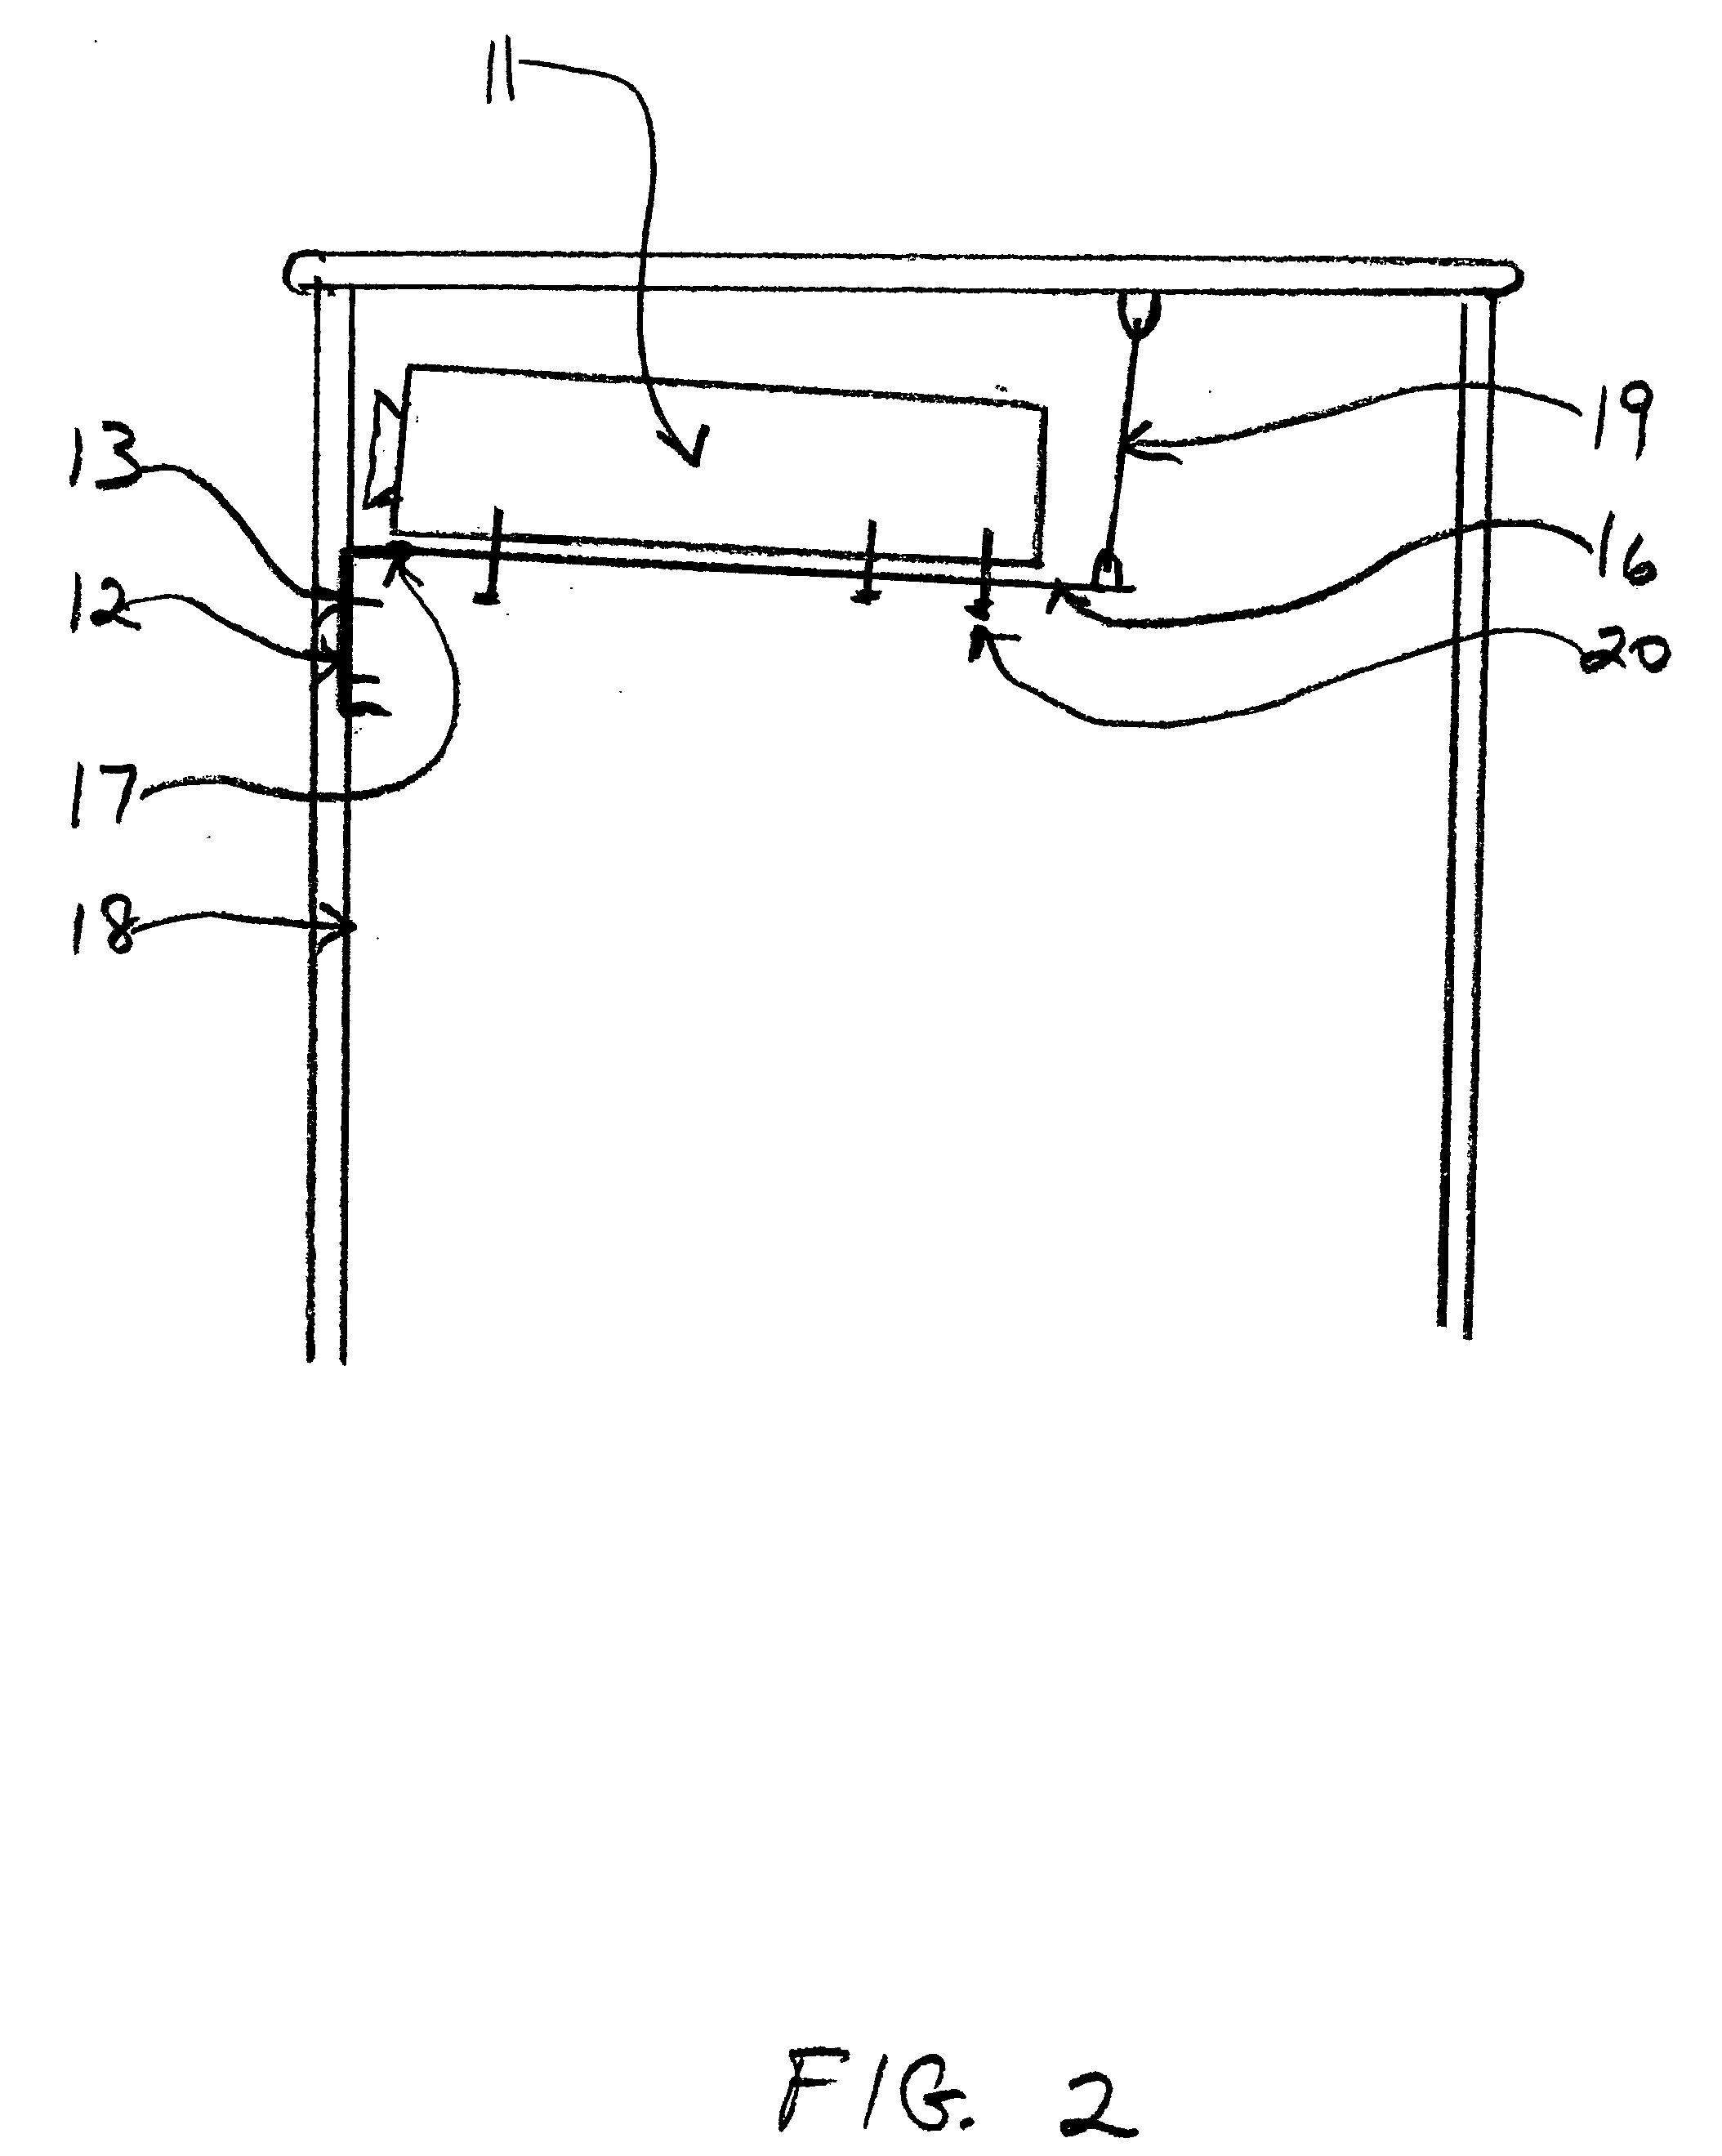 Apparatus for mounting a data/video projector in a portable enclosure